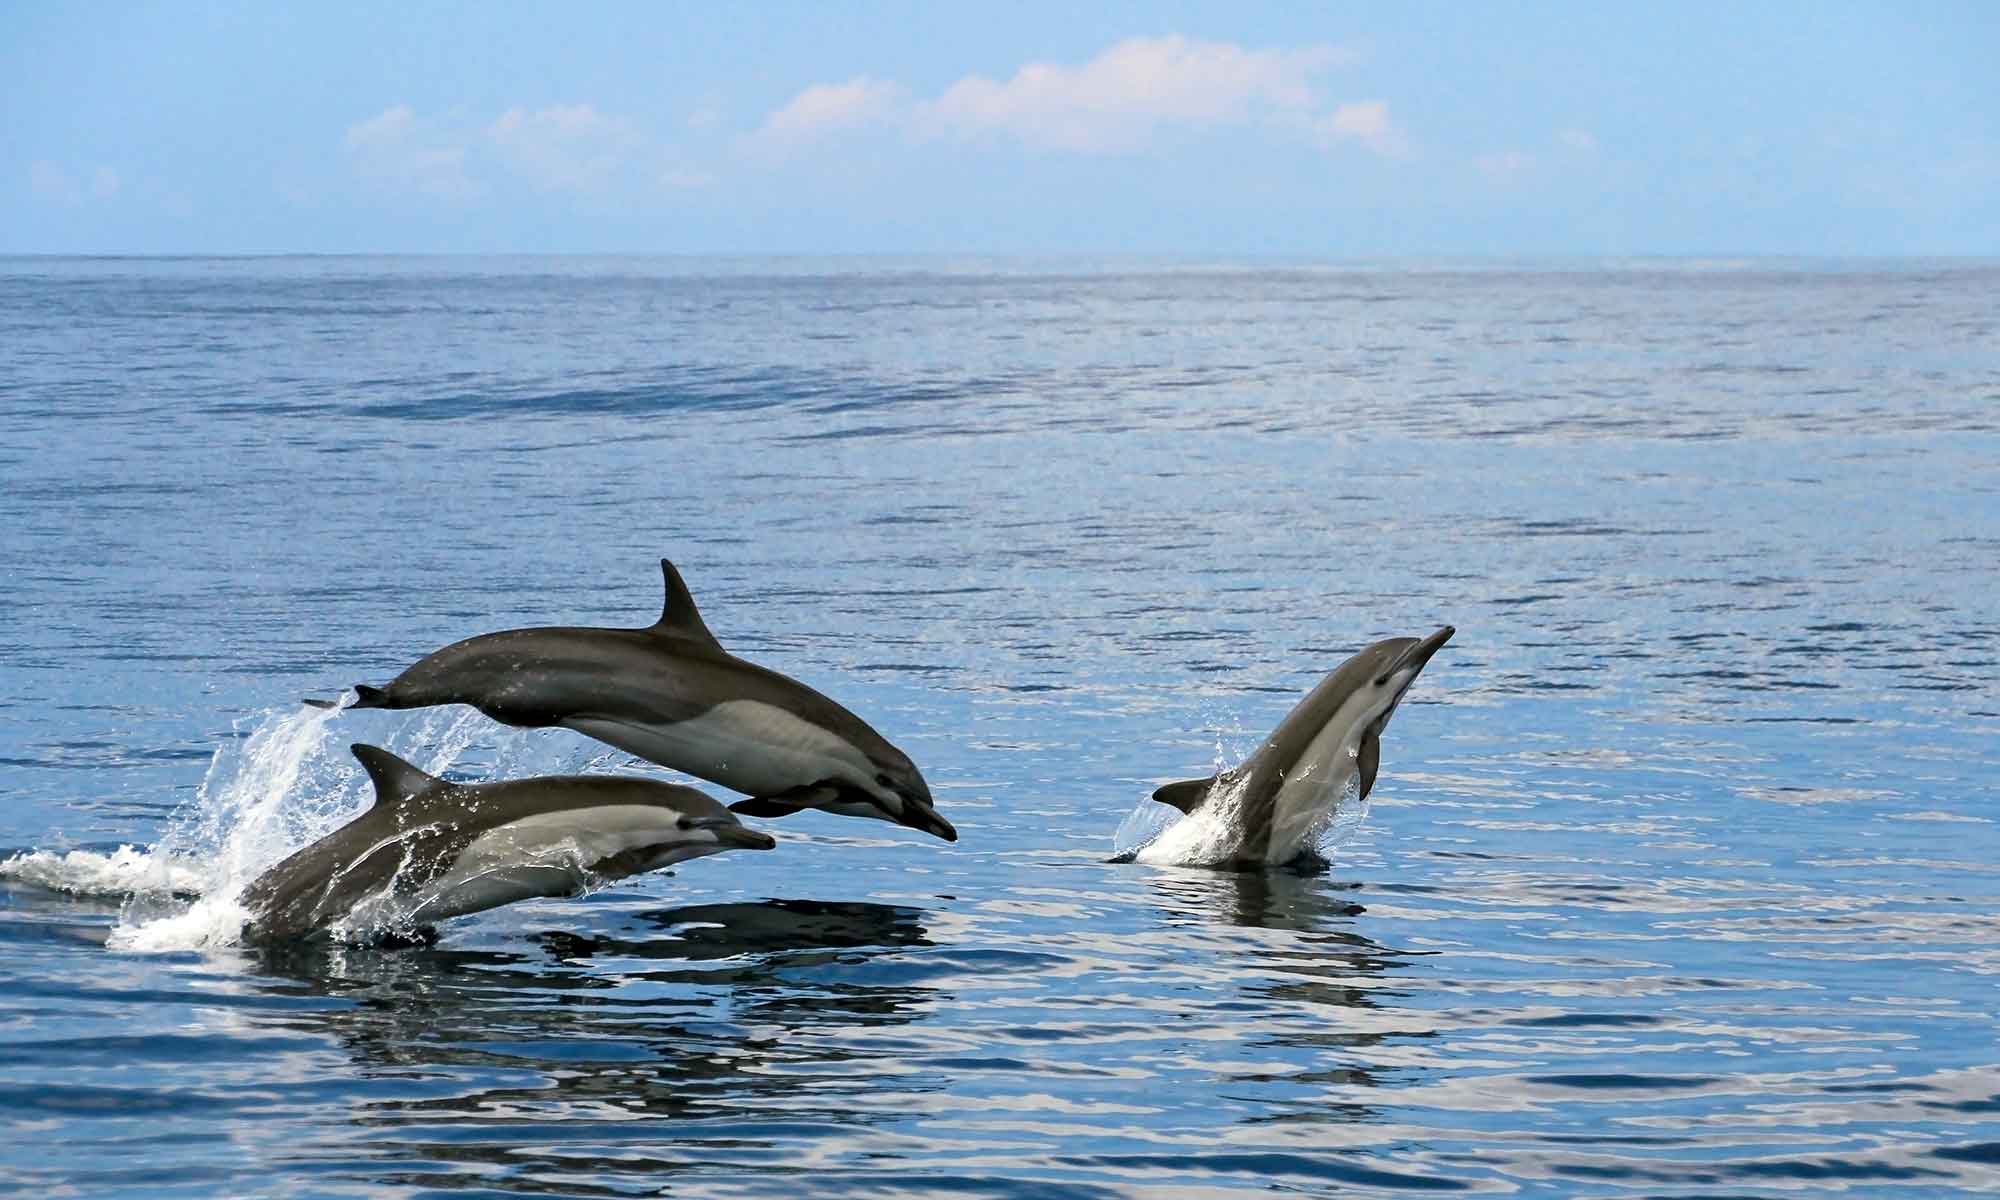 The Common dolphin is a frequent visitor to Madeira during the cooler winter months.